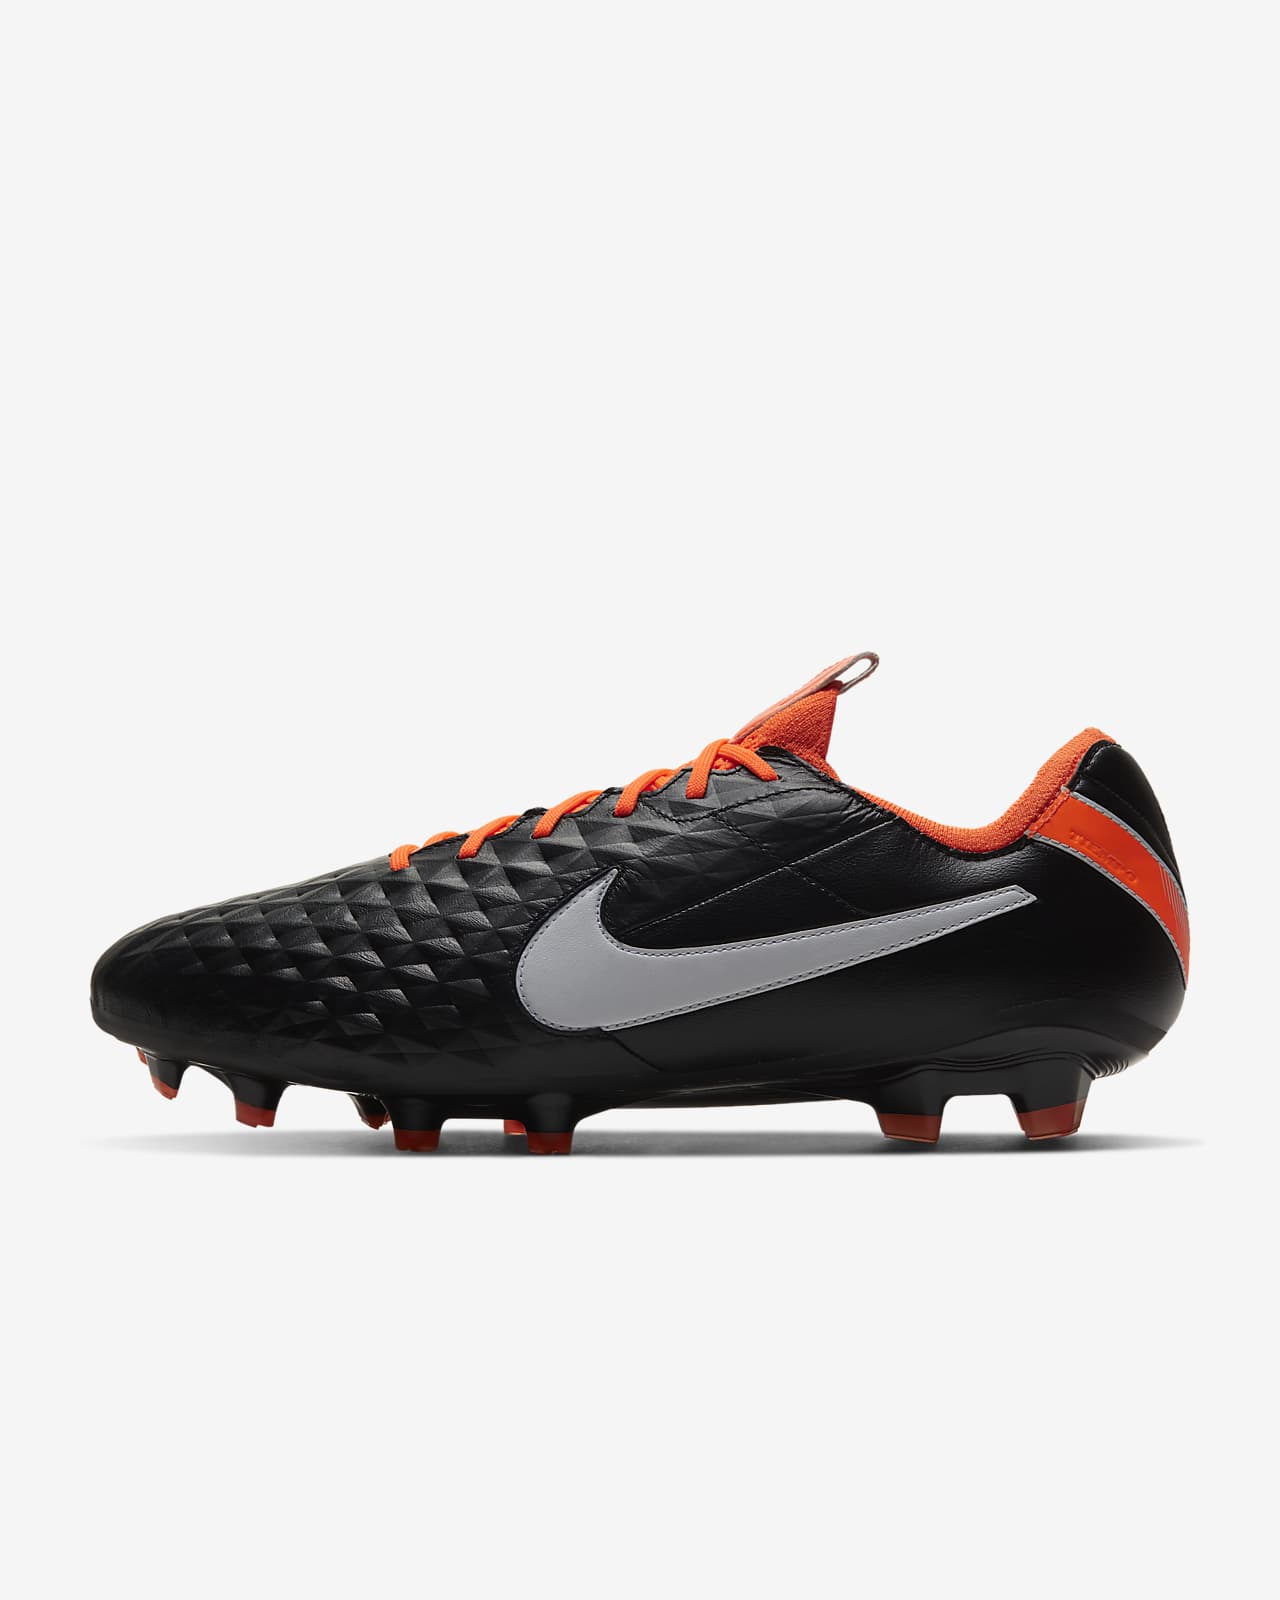 Nike Tiempo Legend 8 Elite FG Firm-Ground Soccer Cleat. Nike JP